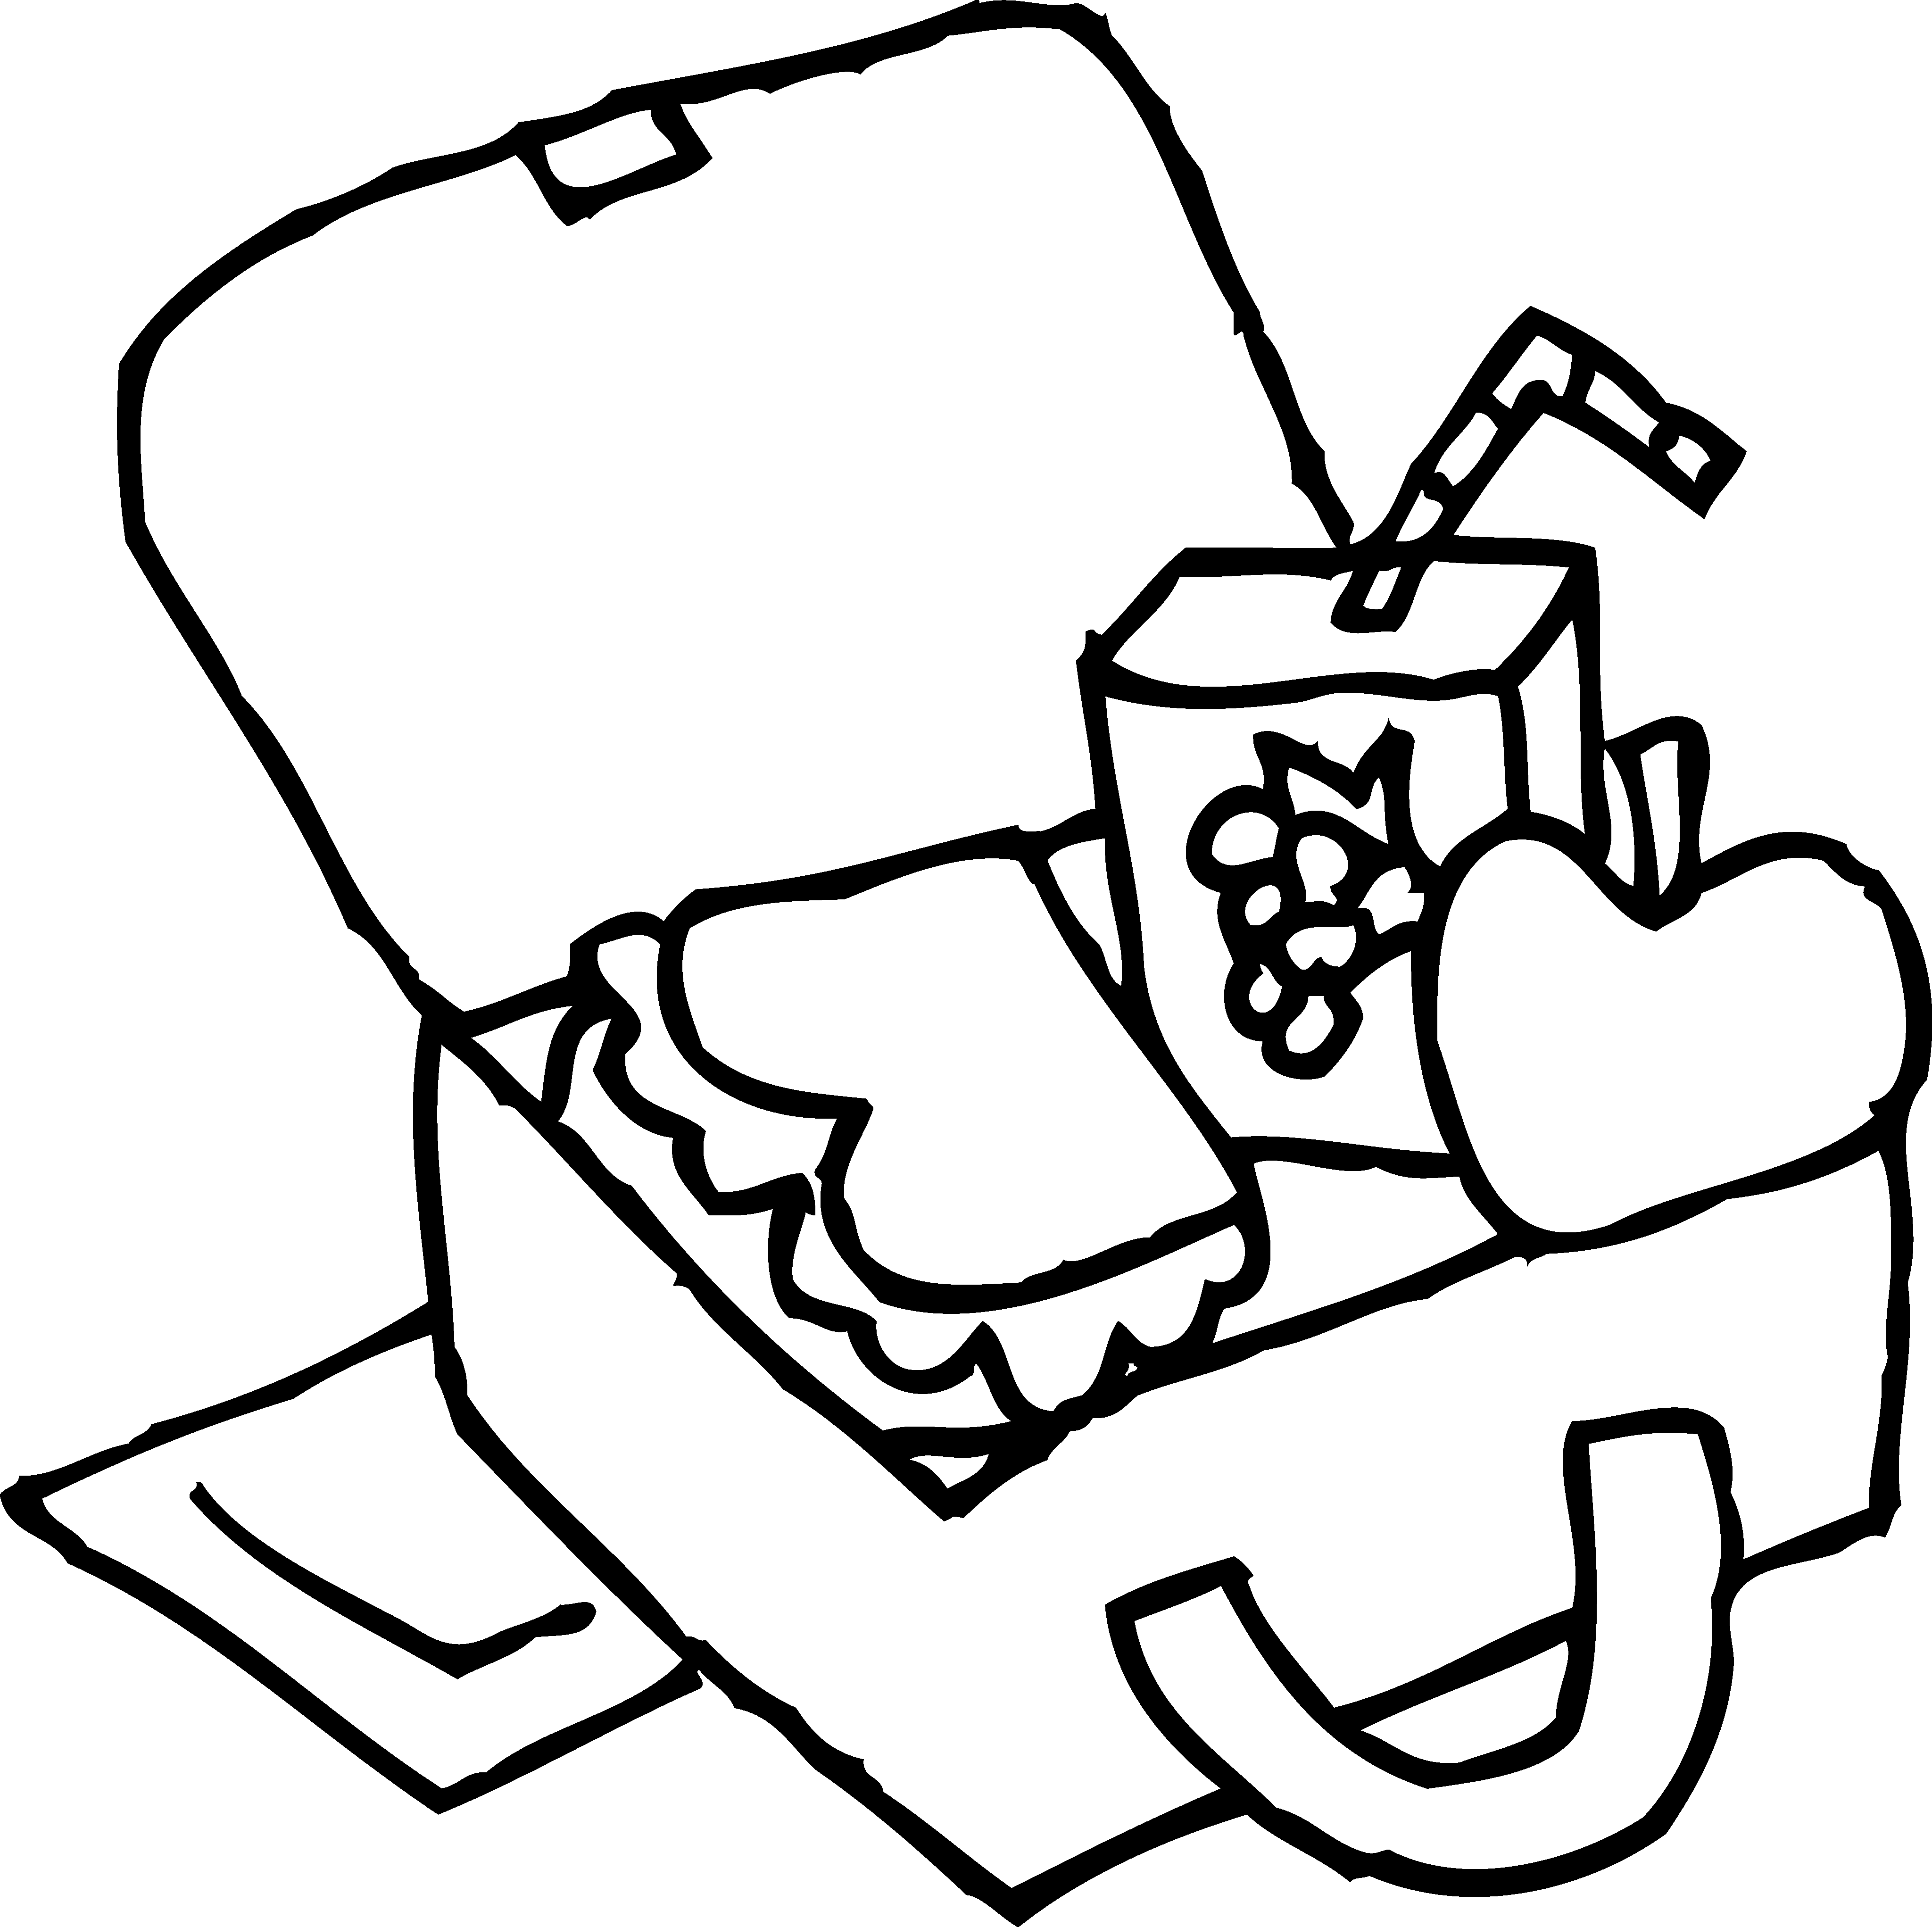 snack clipart black and white